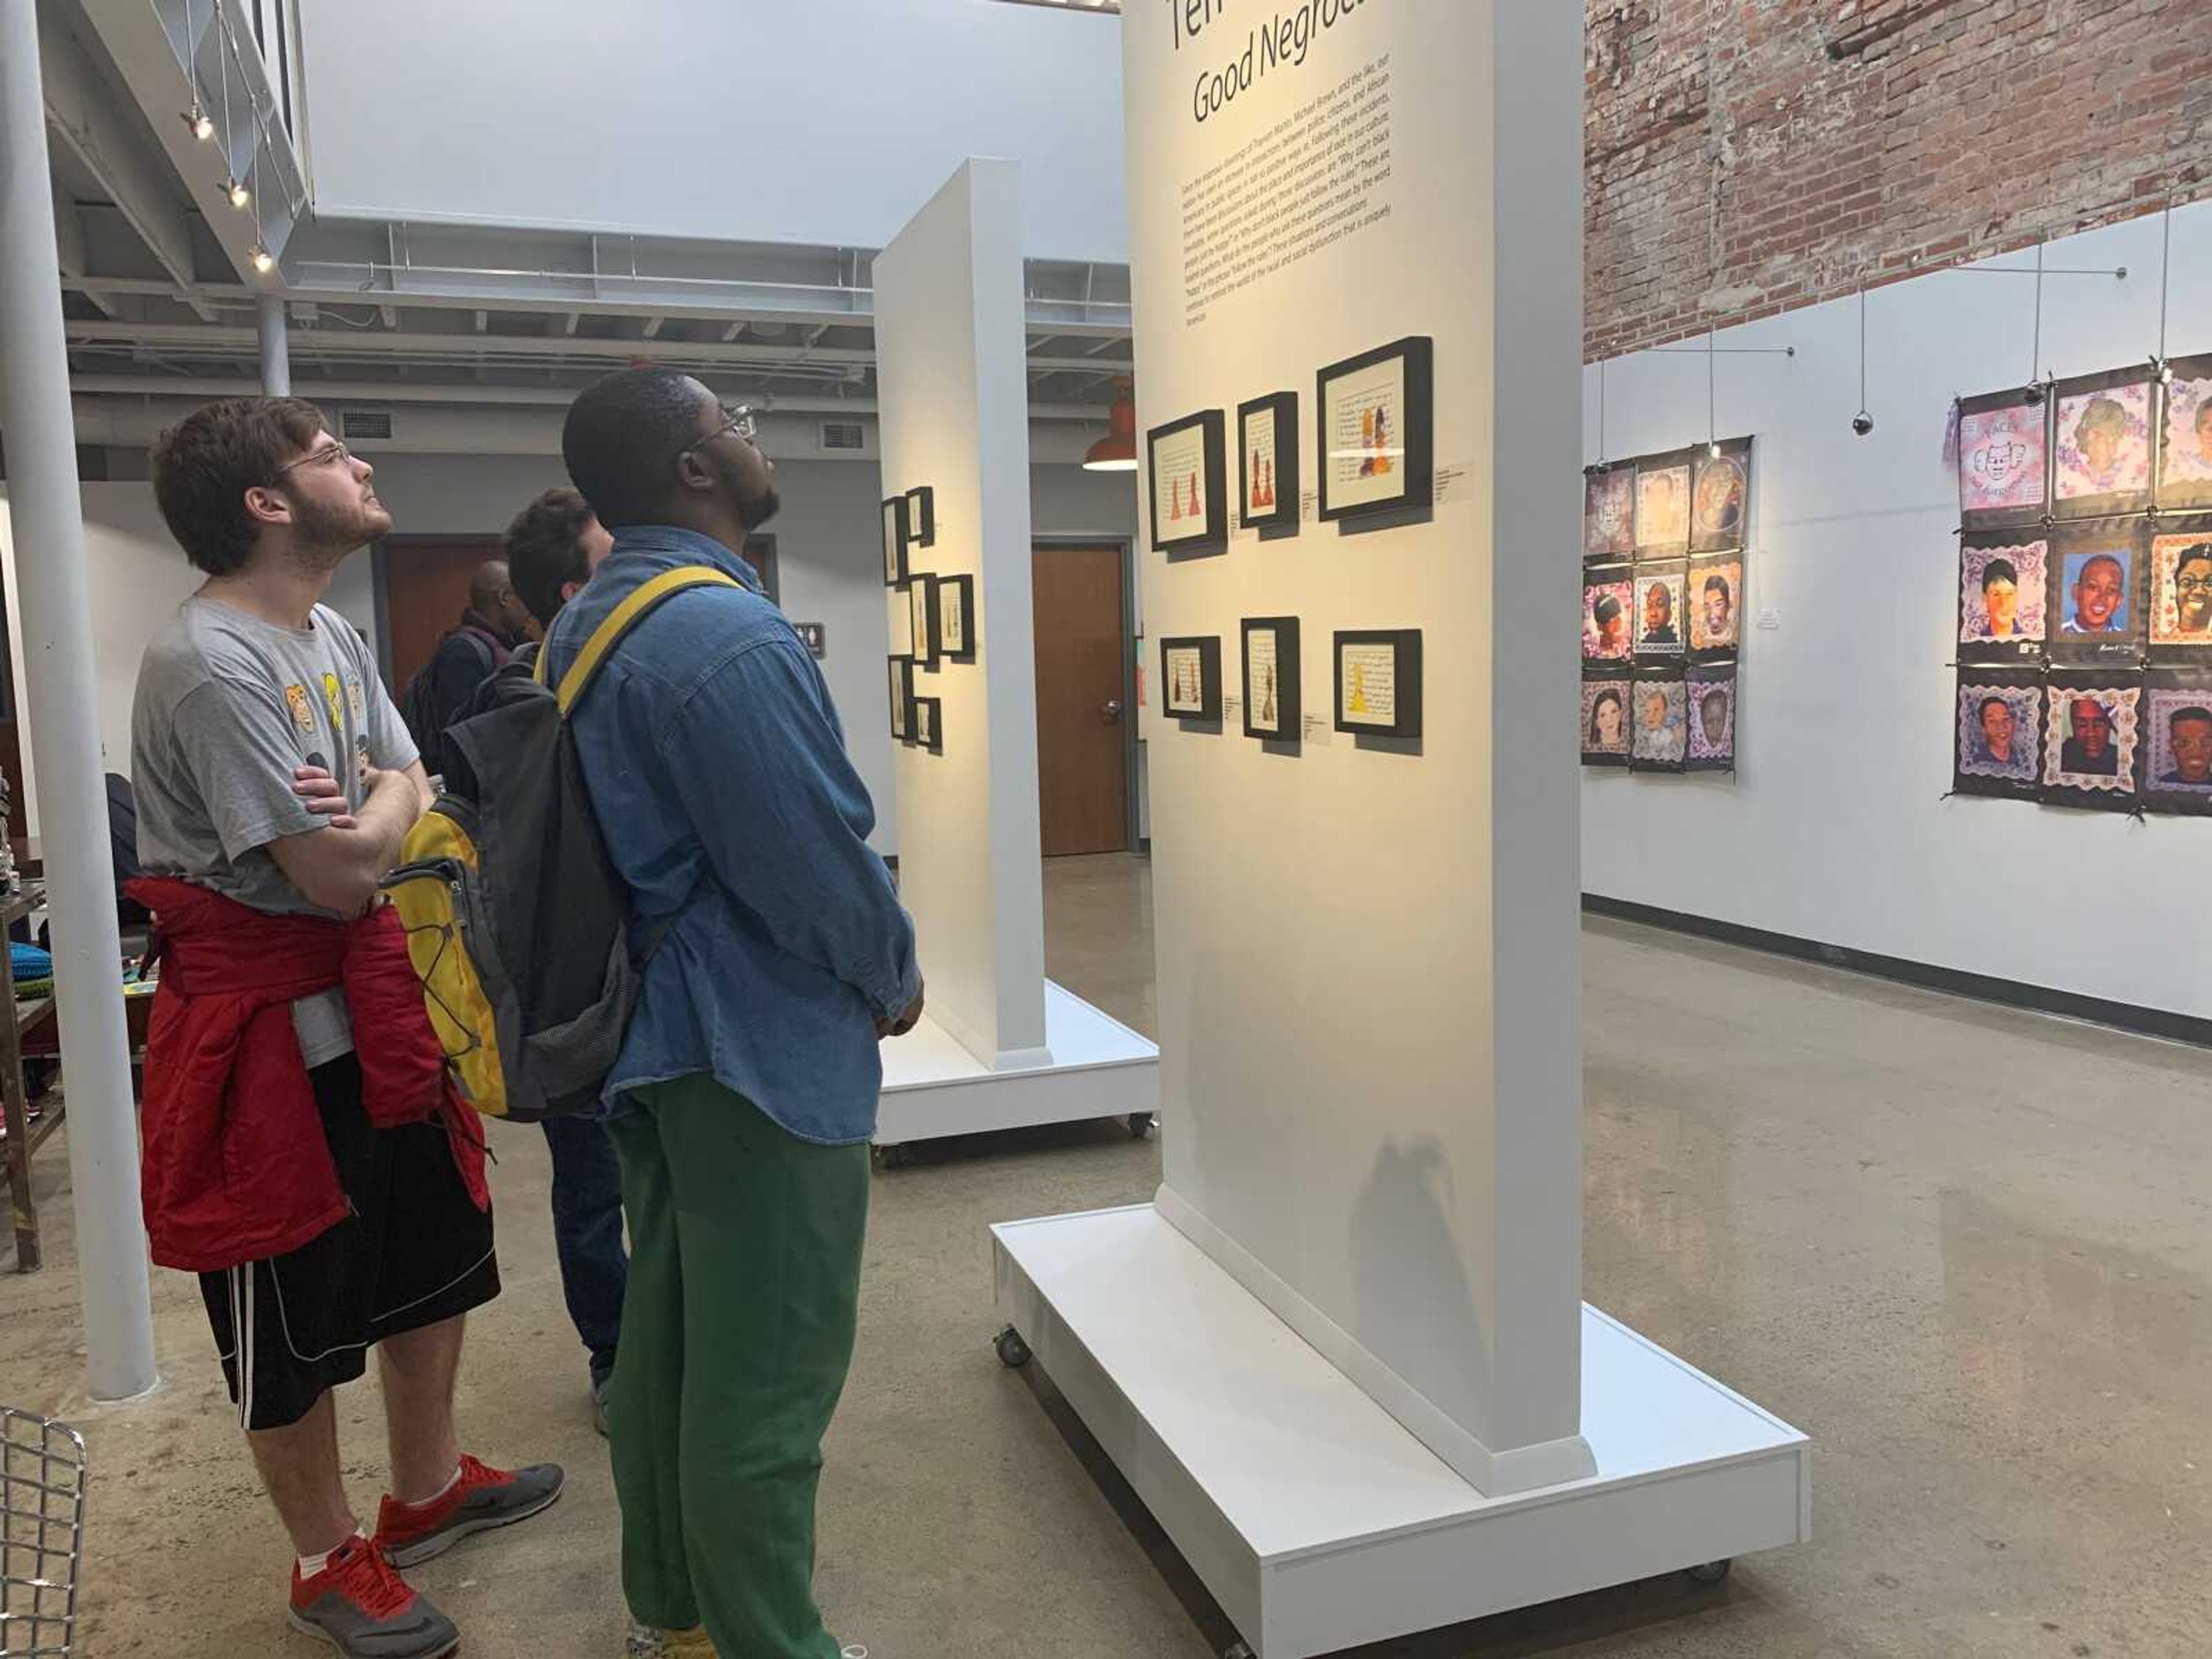 Attendees of the event looking at artwork from the artist, Terrell Carter
